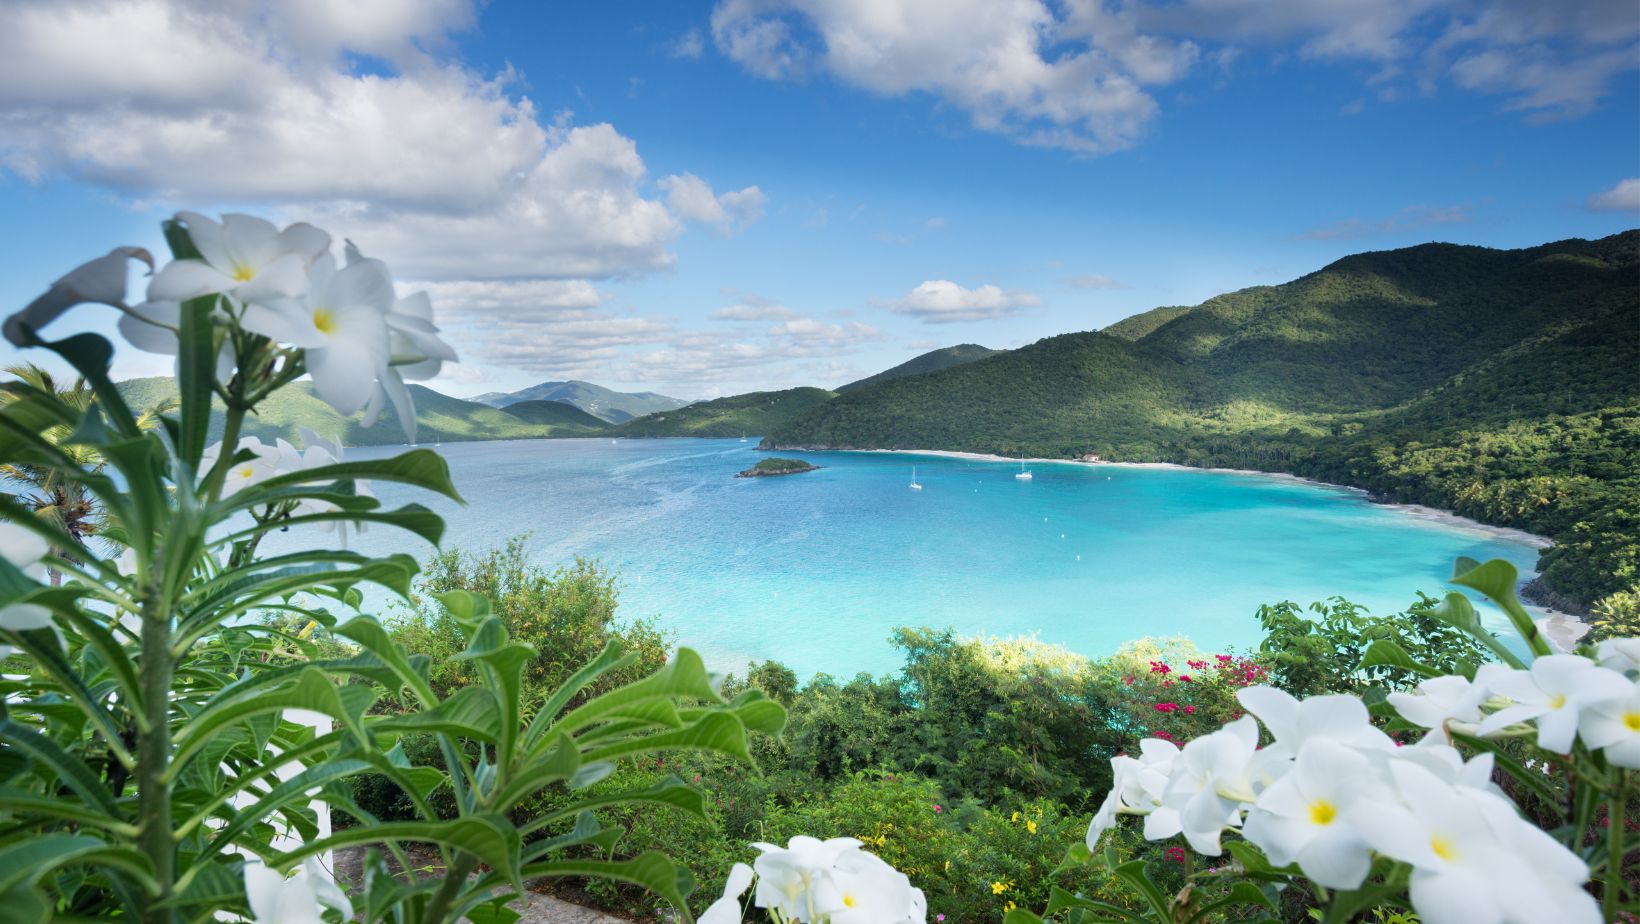 Cinnamon Bay offers a perfect blend of adventure, history, and relaxation, making it a must-visit destination in the US Virgin Islands.